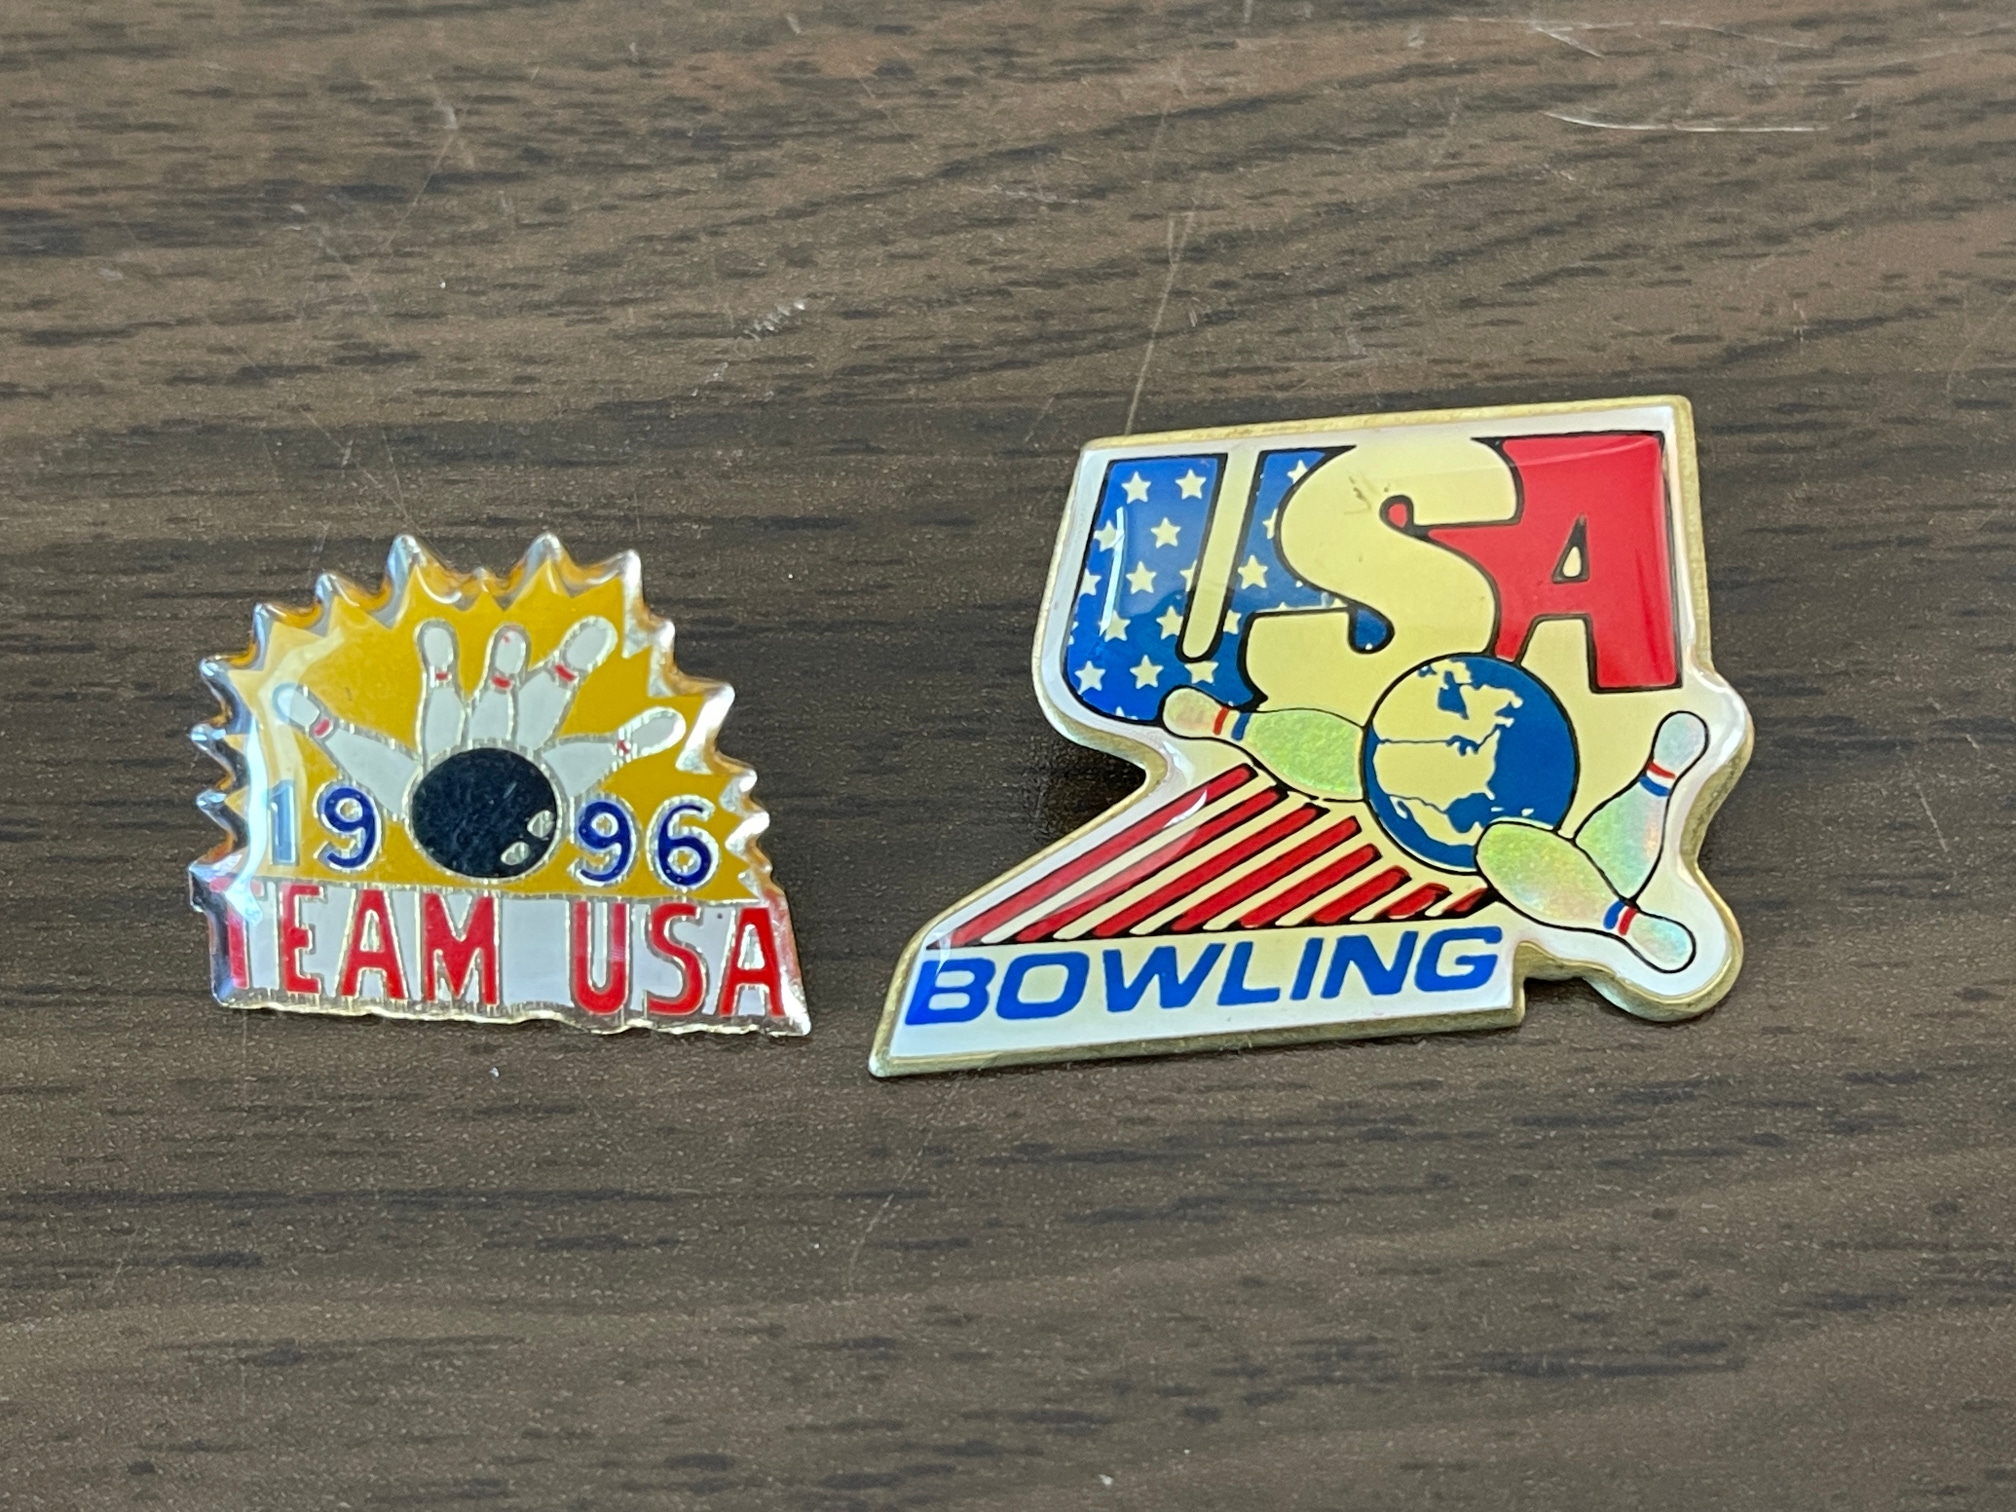 Team USA Bowling SUPER VINTAGE 1996 Lapel Hat Pin Collectible Set of 2 Pins!